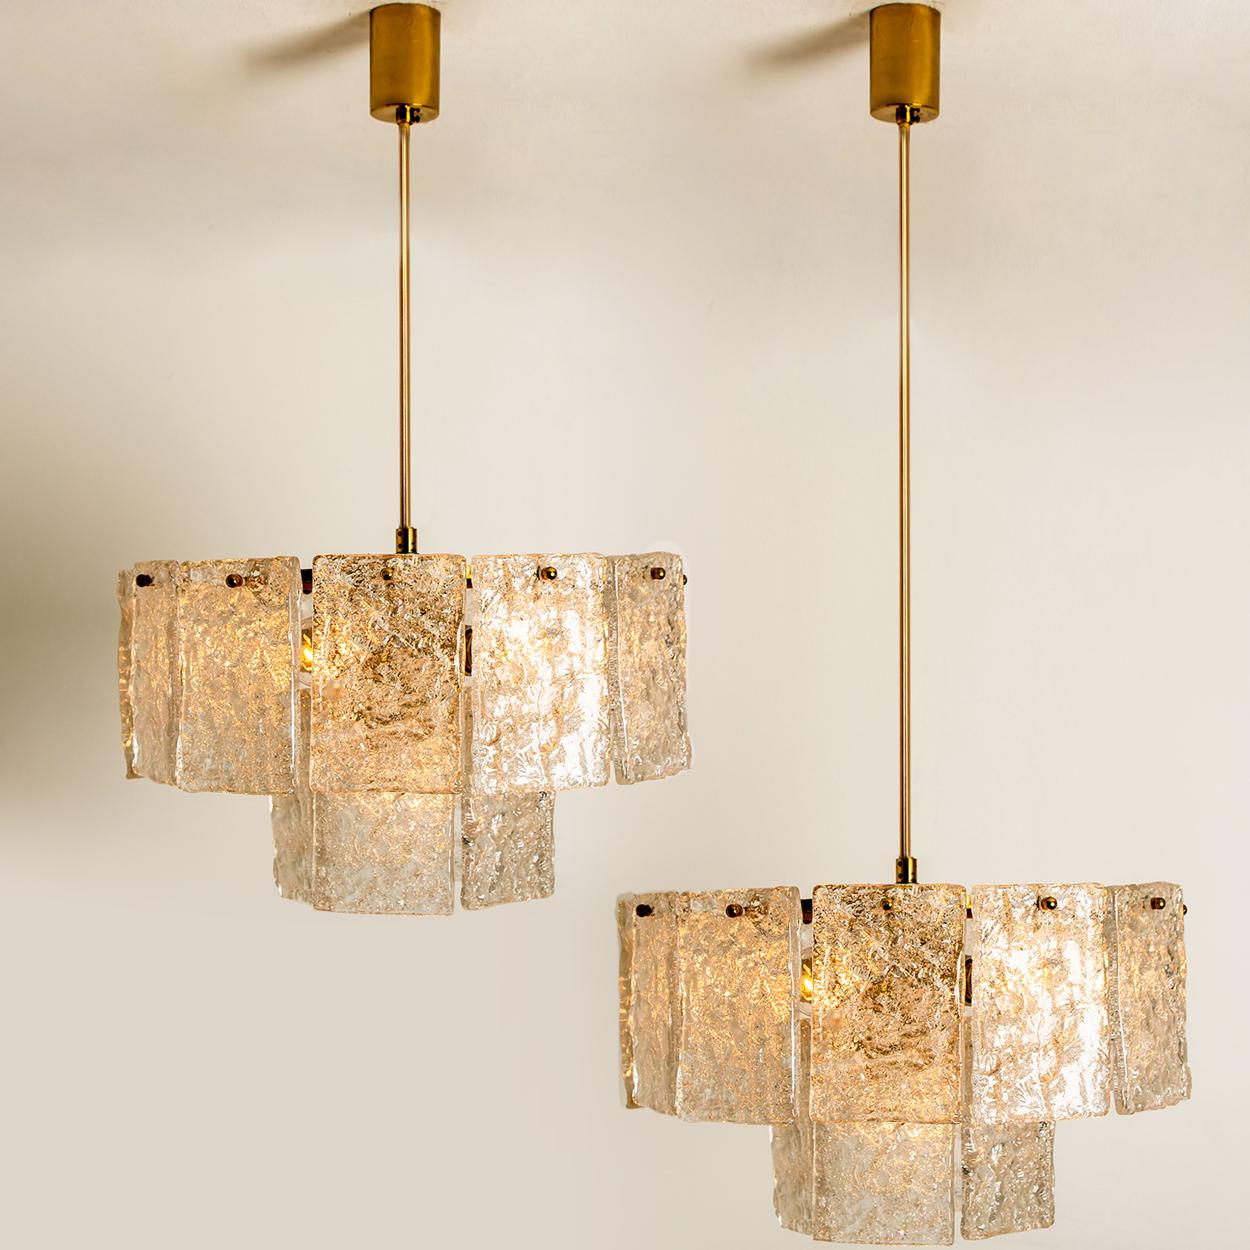 Mid-Century Modern 1 of the 2 of Glass and Brass Two Tiers Light Fixtures from Hillebrand, 1960s For Sale